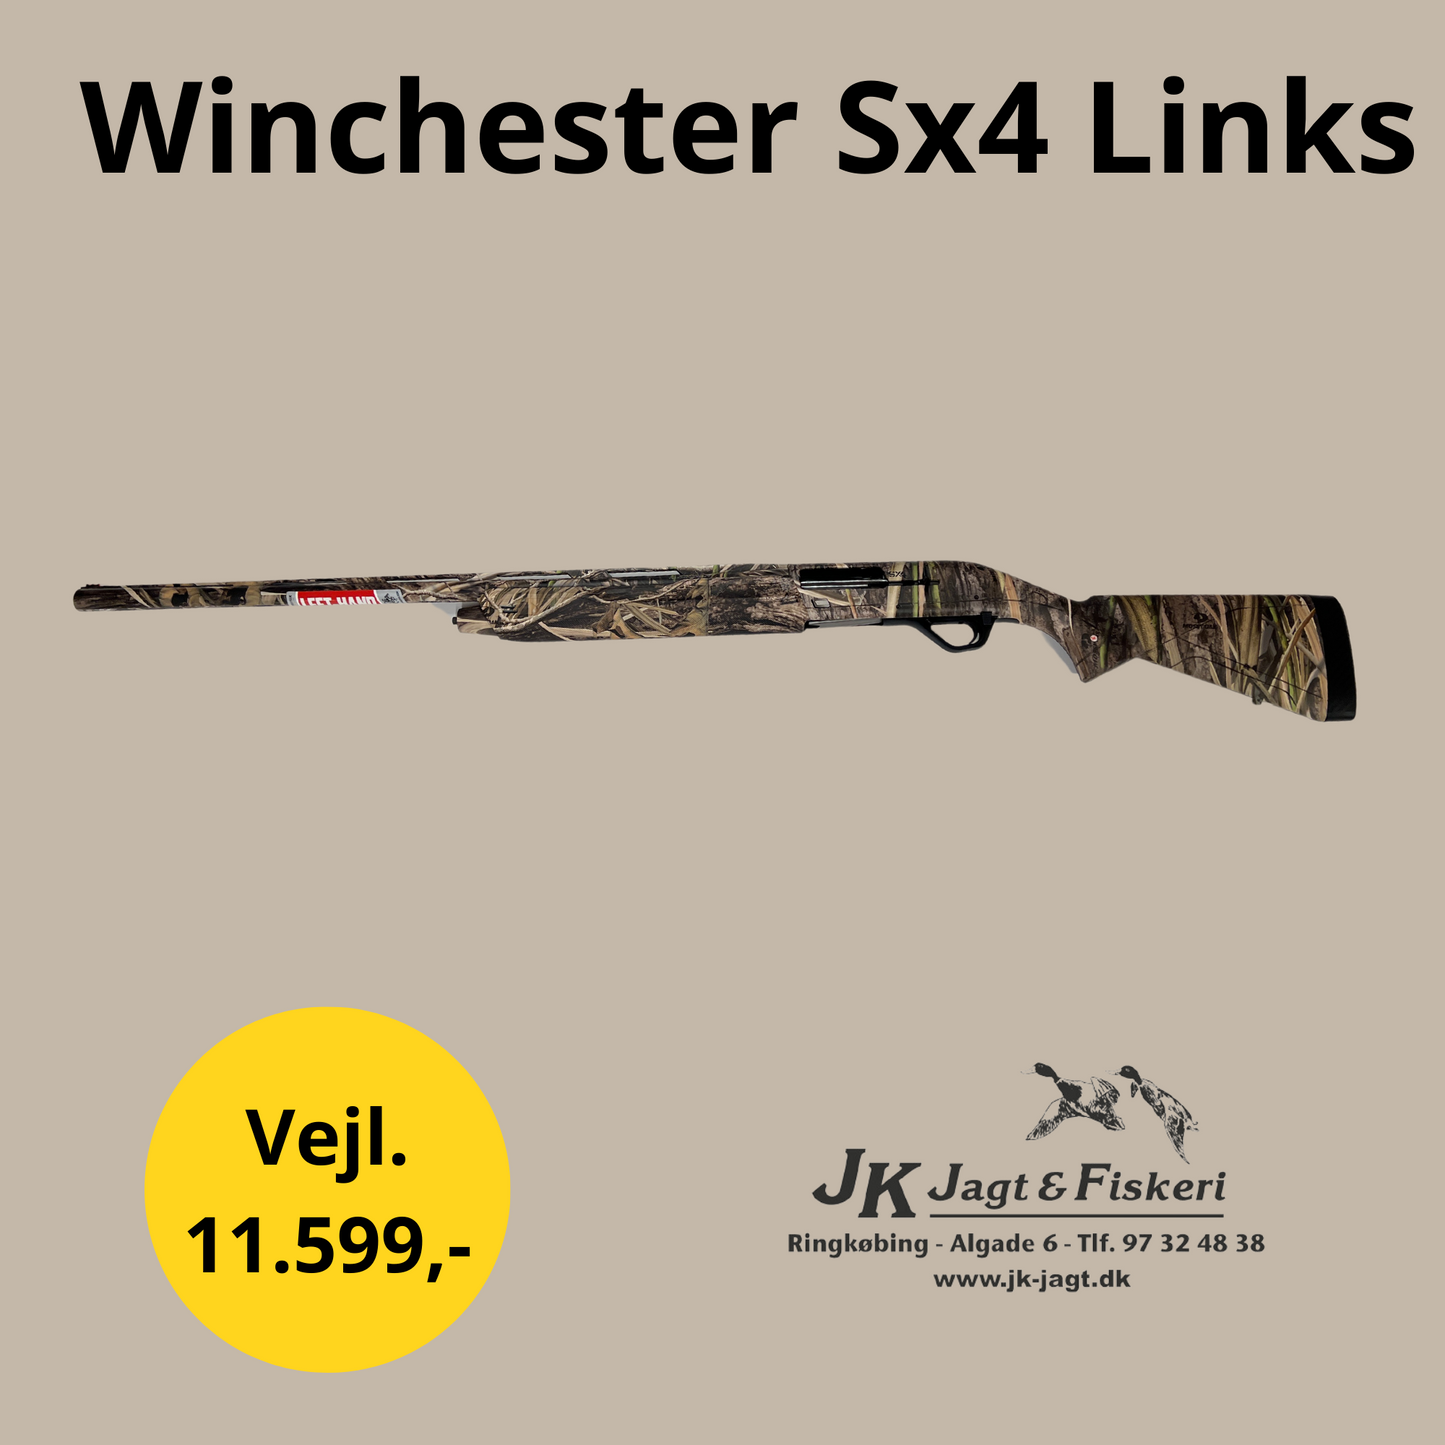 Winchester Sx4 Links